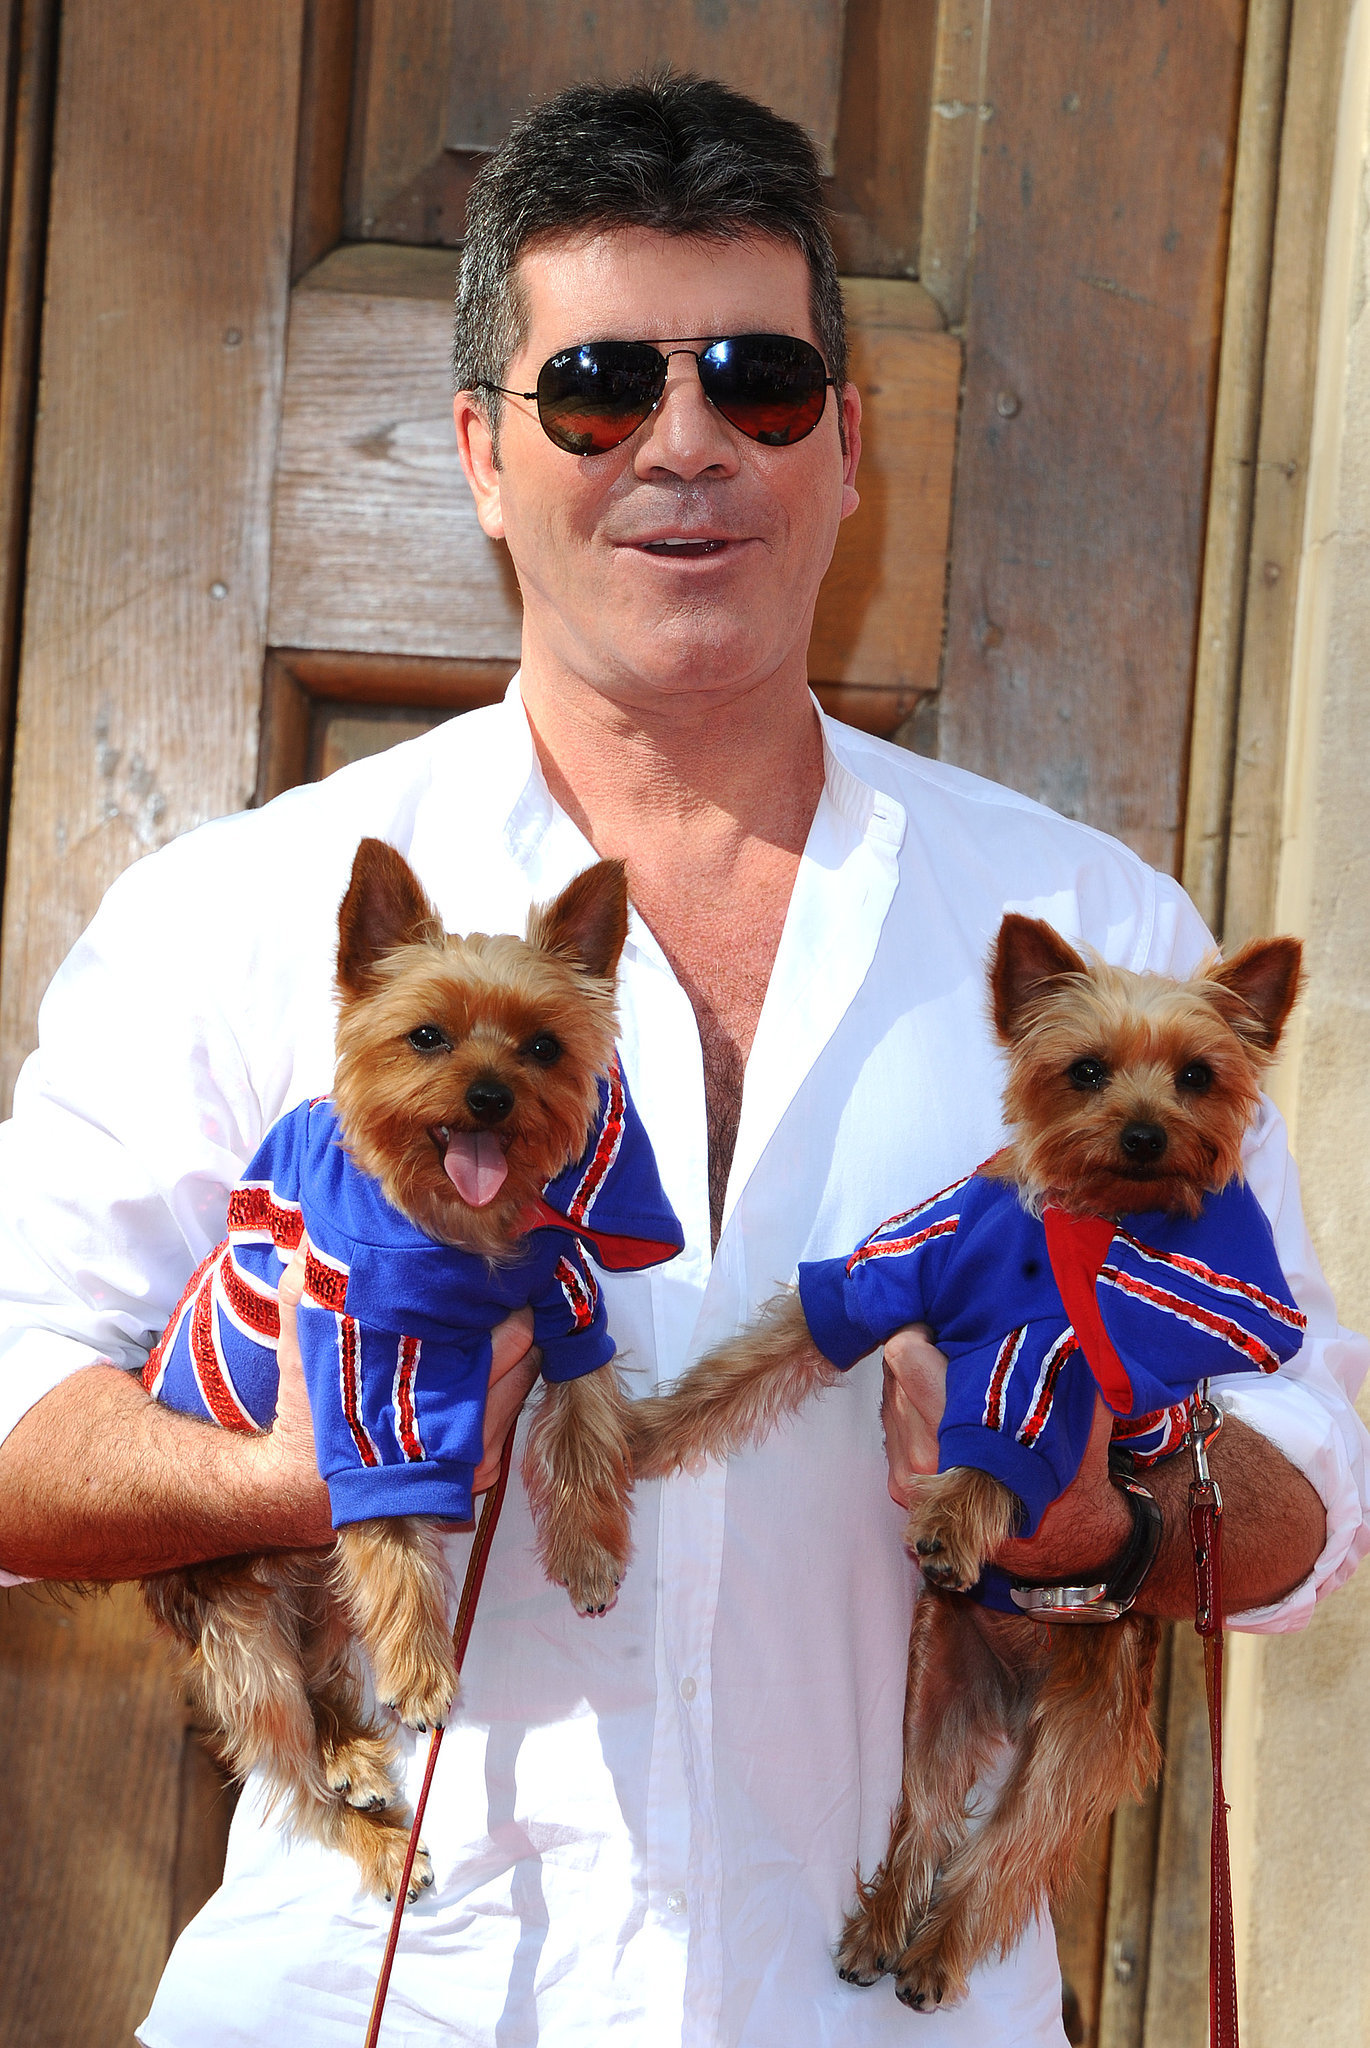 Simon-Cowell-dressed-up-his-two-dogs-special-event